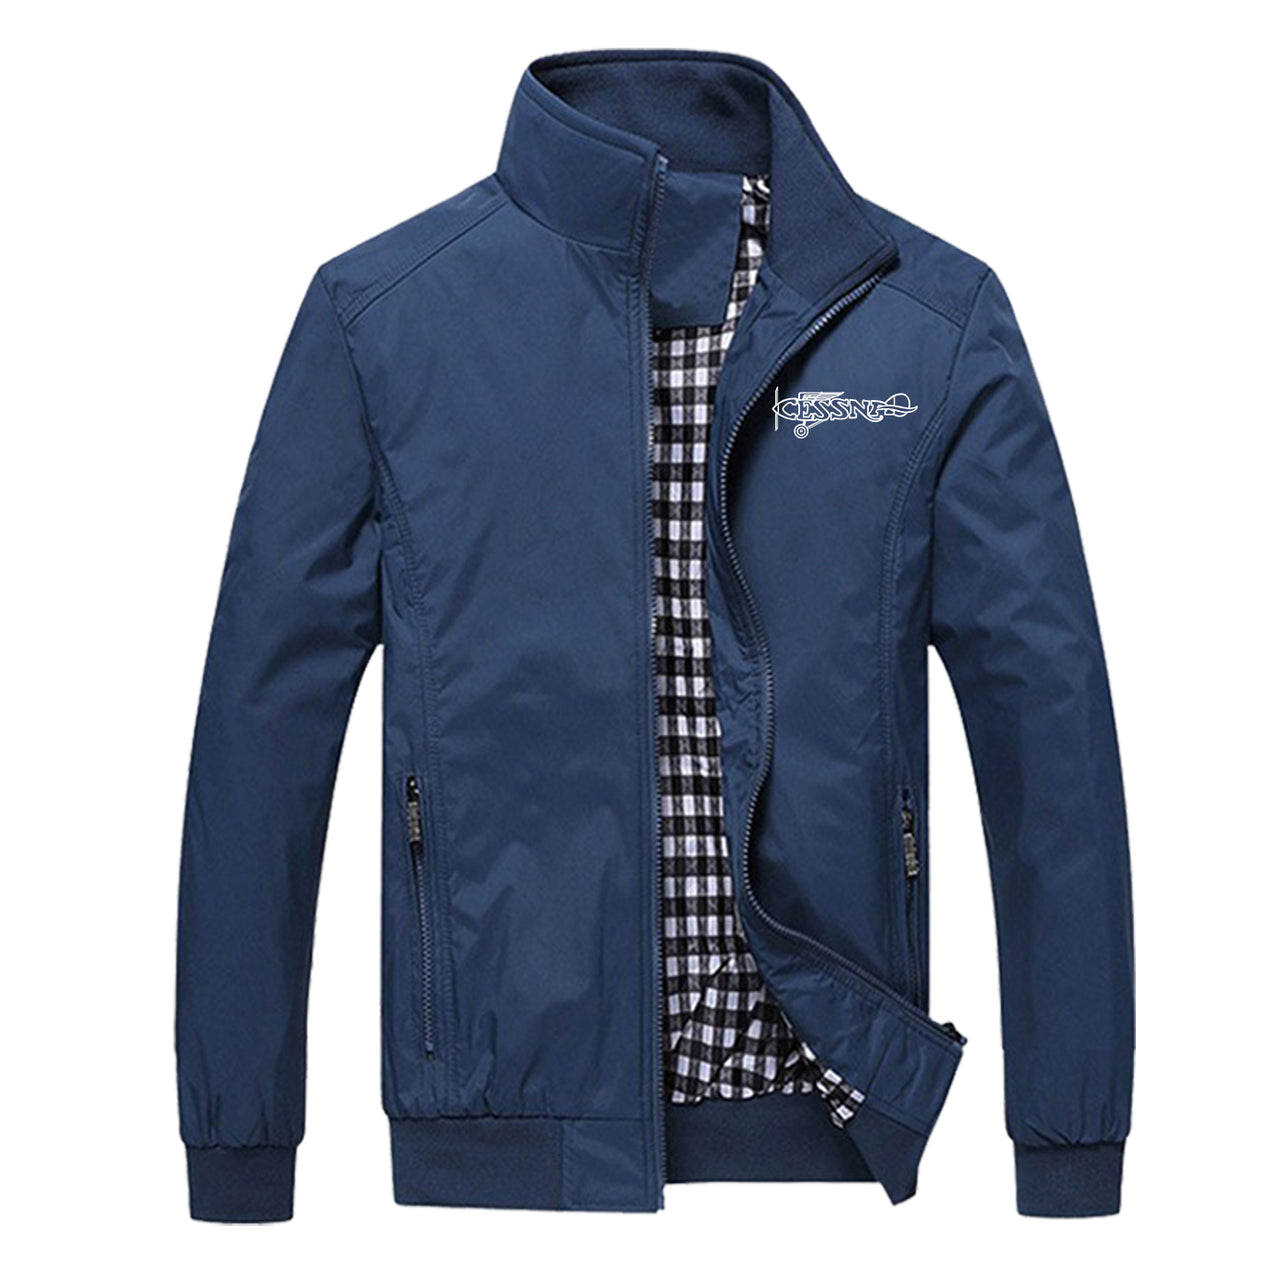 Special Cessna Text Designed Stylish Jackets